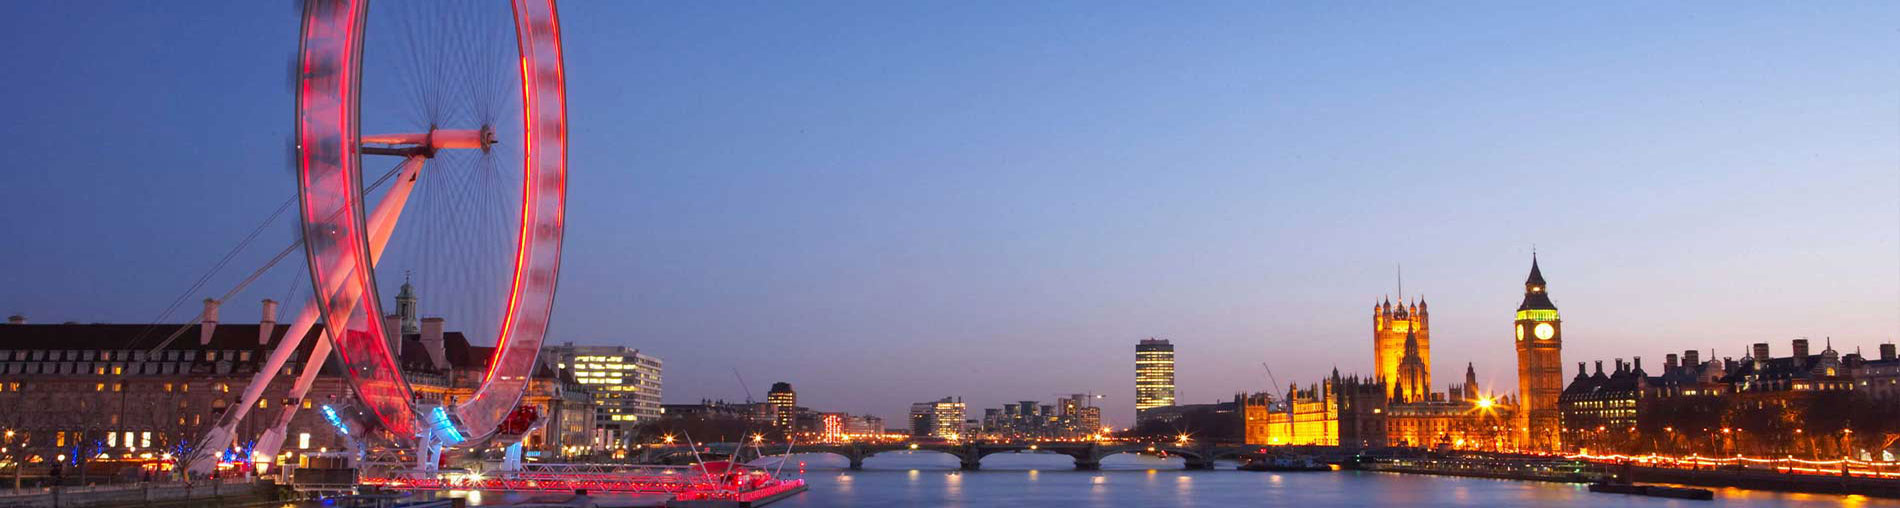 London Holiday Package - 3 Nights